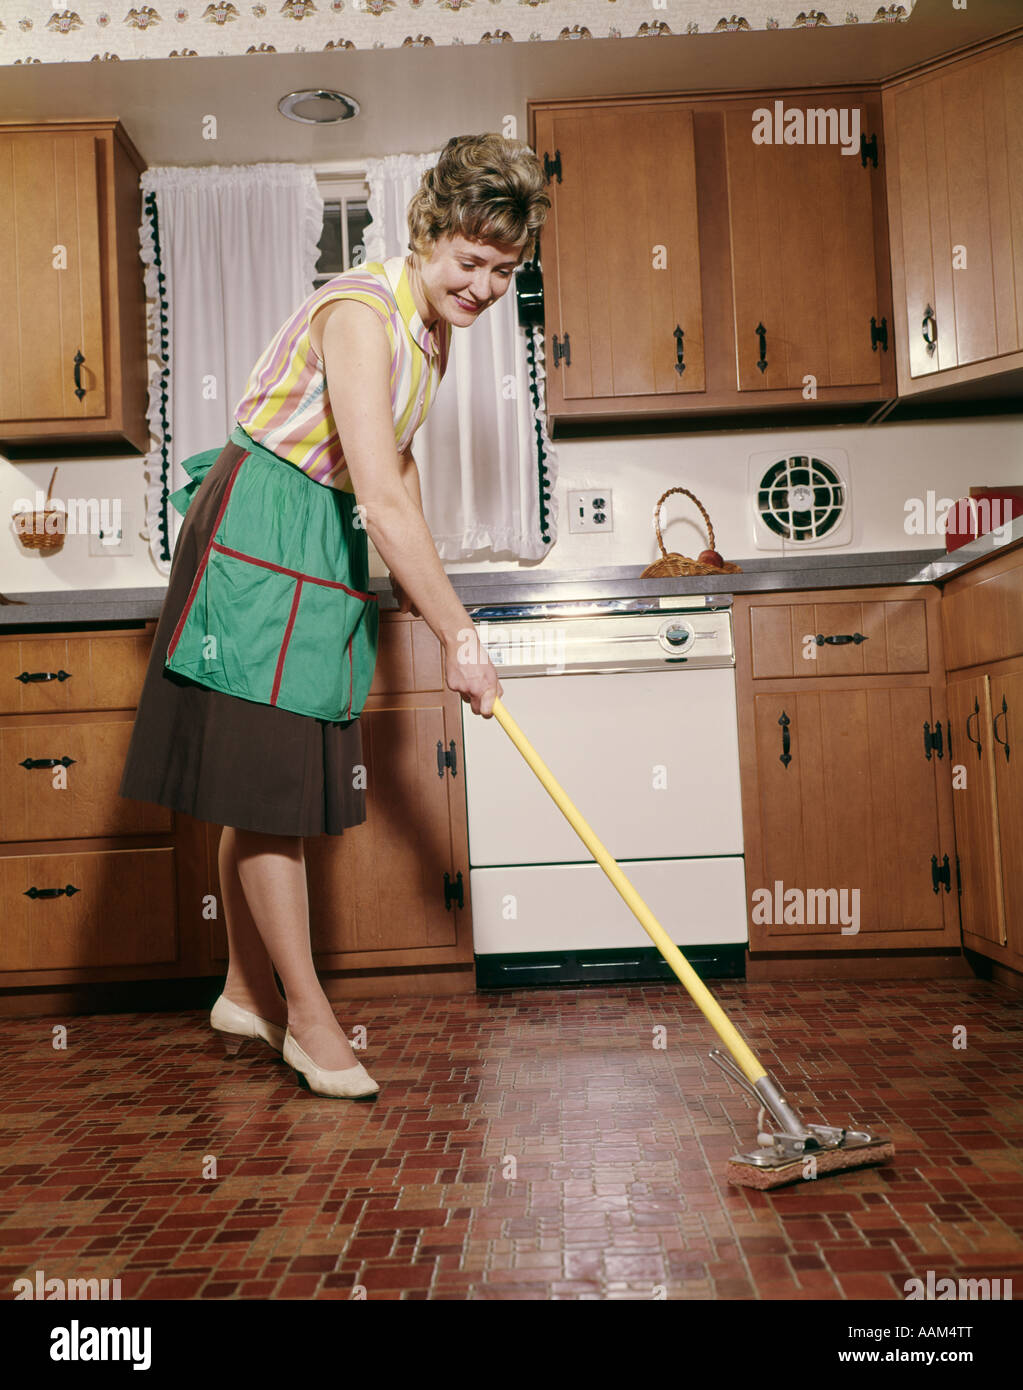 1960s Woman In Apron Cleaning Kitchen Floor With Sponge Mop Stock